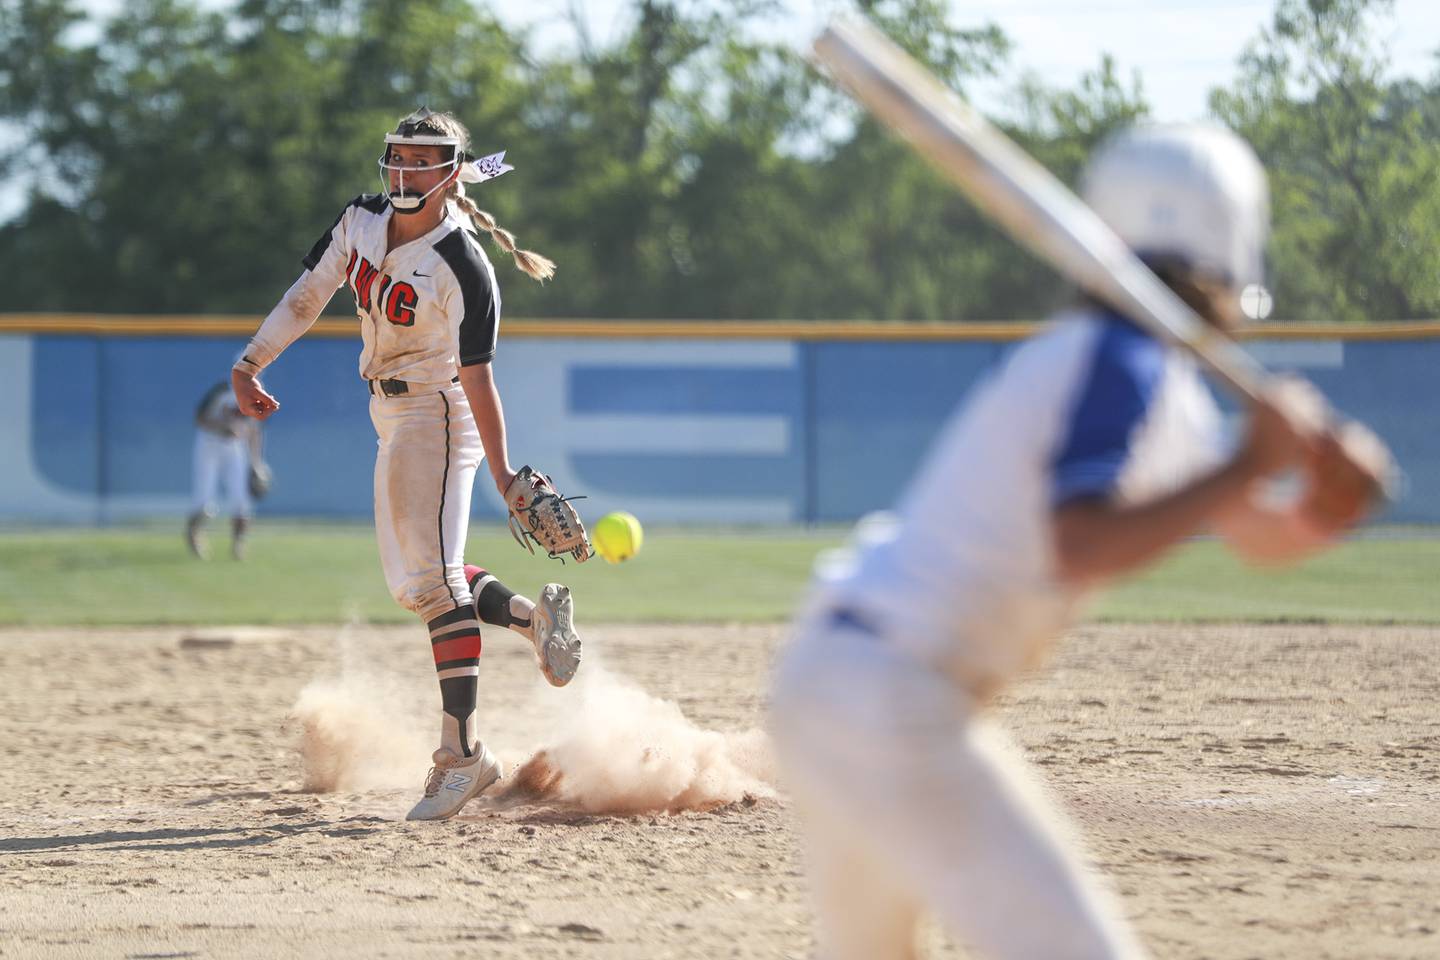 Lincoln-Way Central pitcher Lyndsey Grein delivers a strike on Monday, June 14, 2021, at Carl Sandberg High School in Orland Park, Ill. The Knights defeated the Stars 5-4.